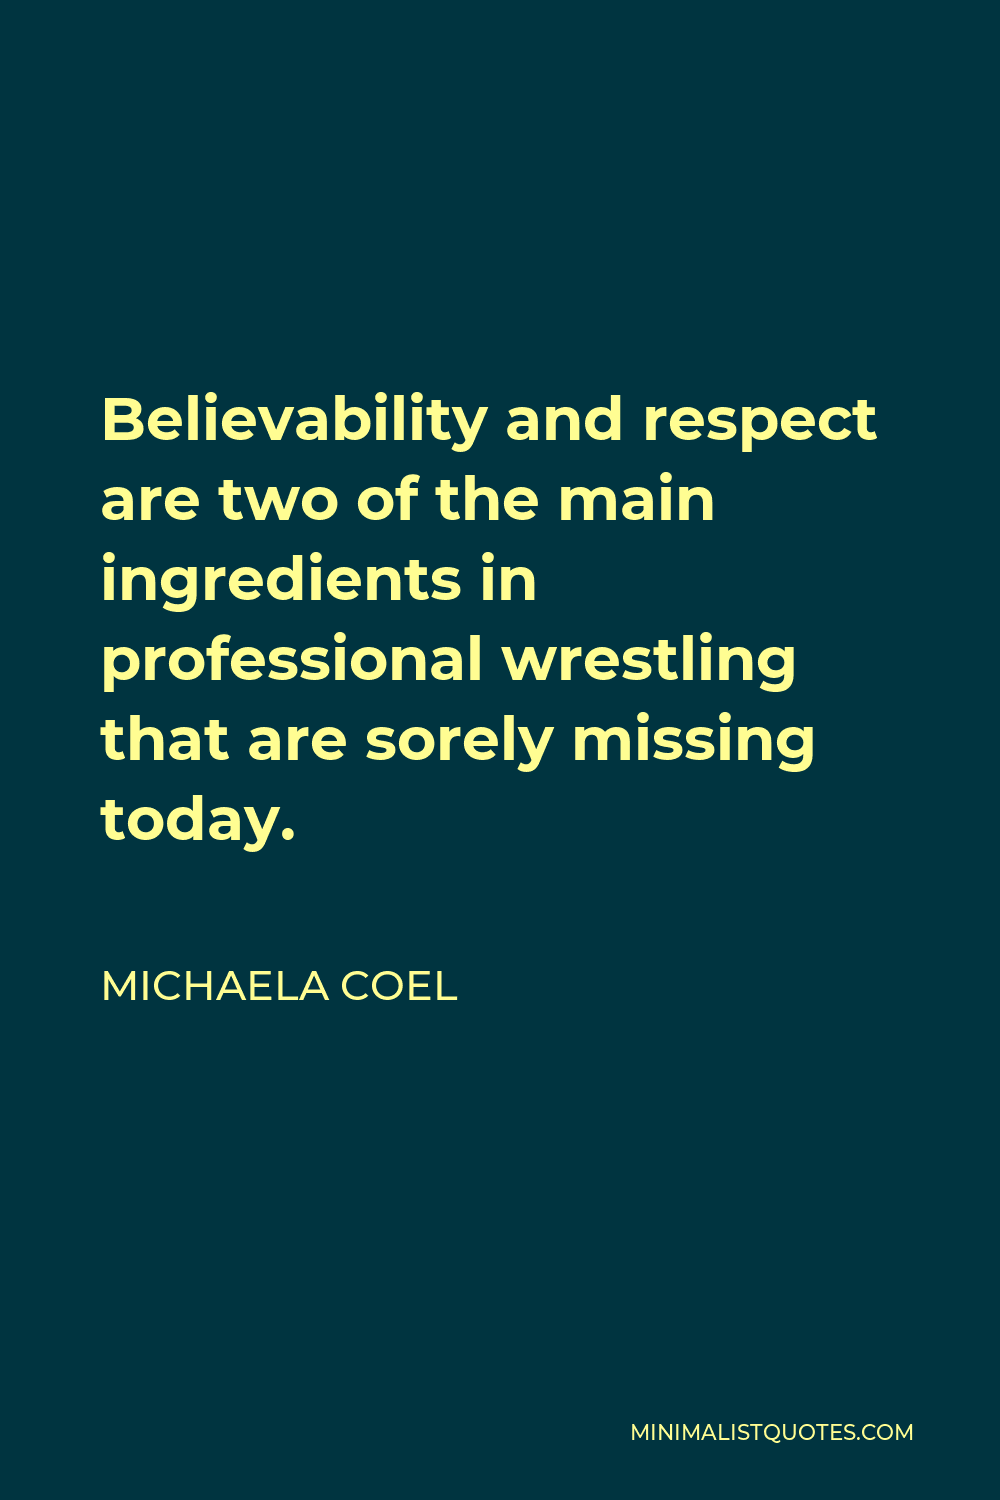 Michaela Coel Quote - Believability and respect are two of the main ingredients in professional wrestling that are sorely missing today.